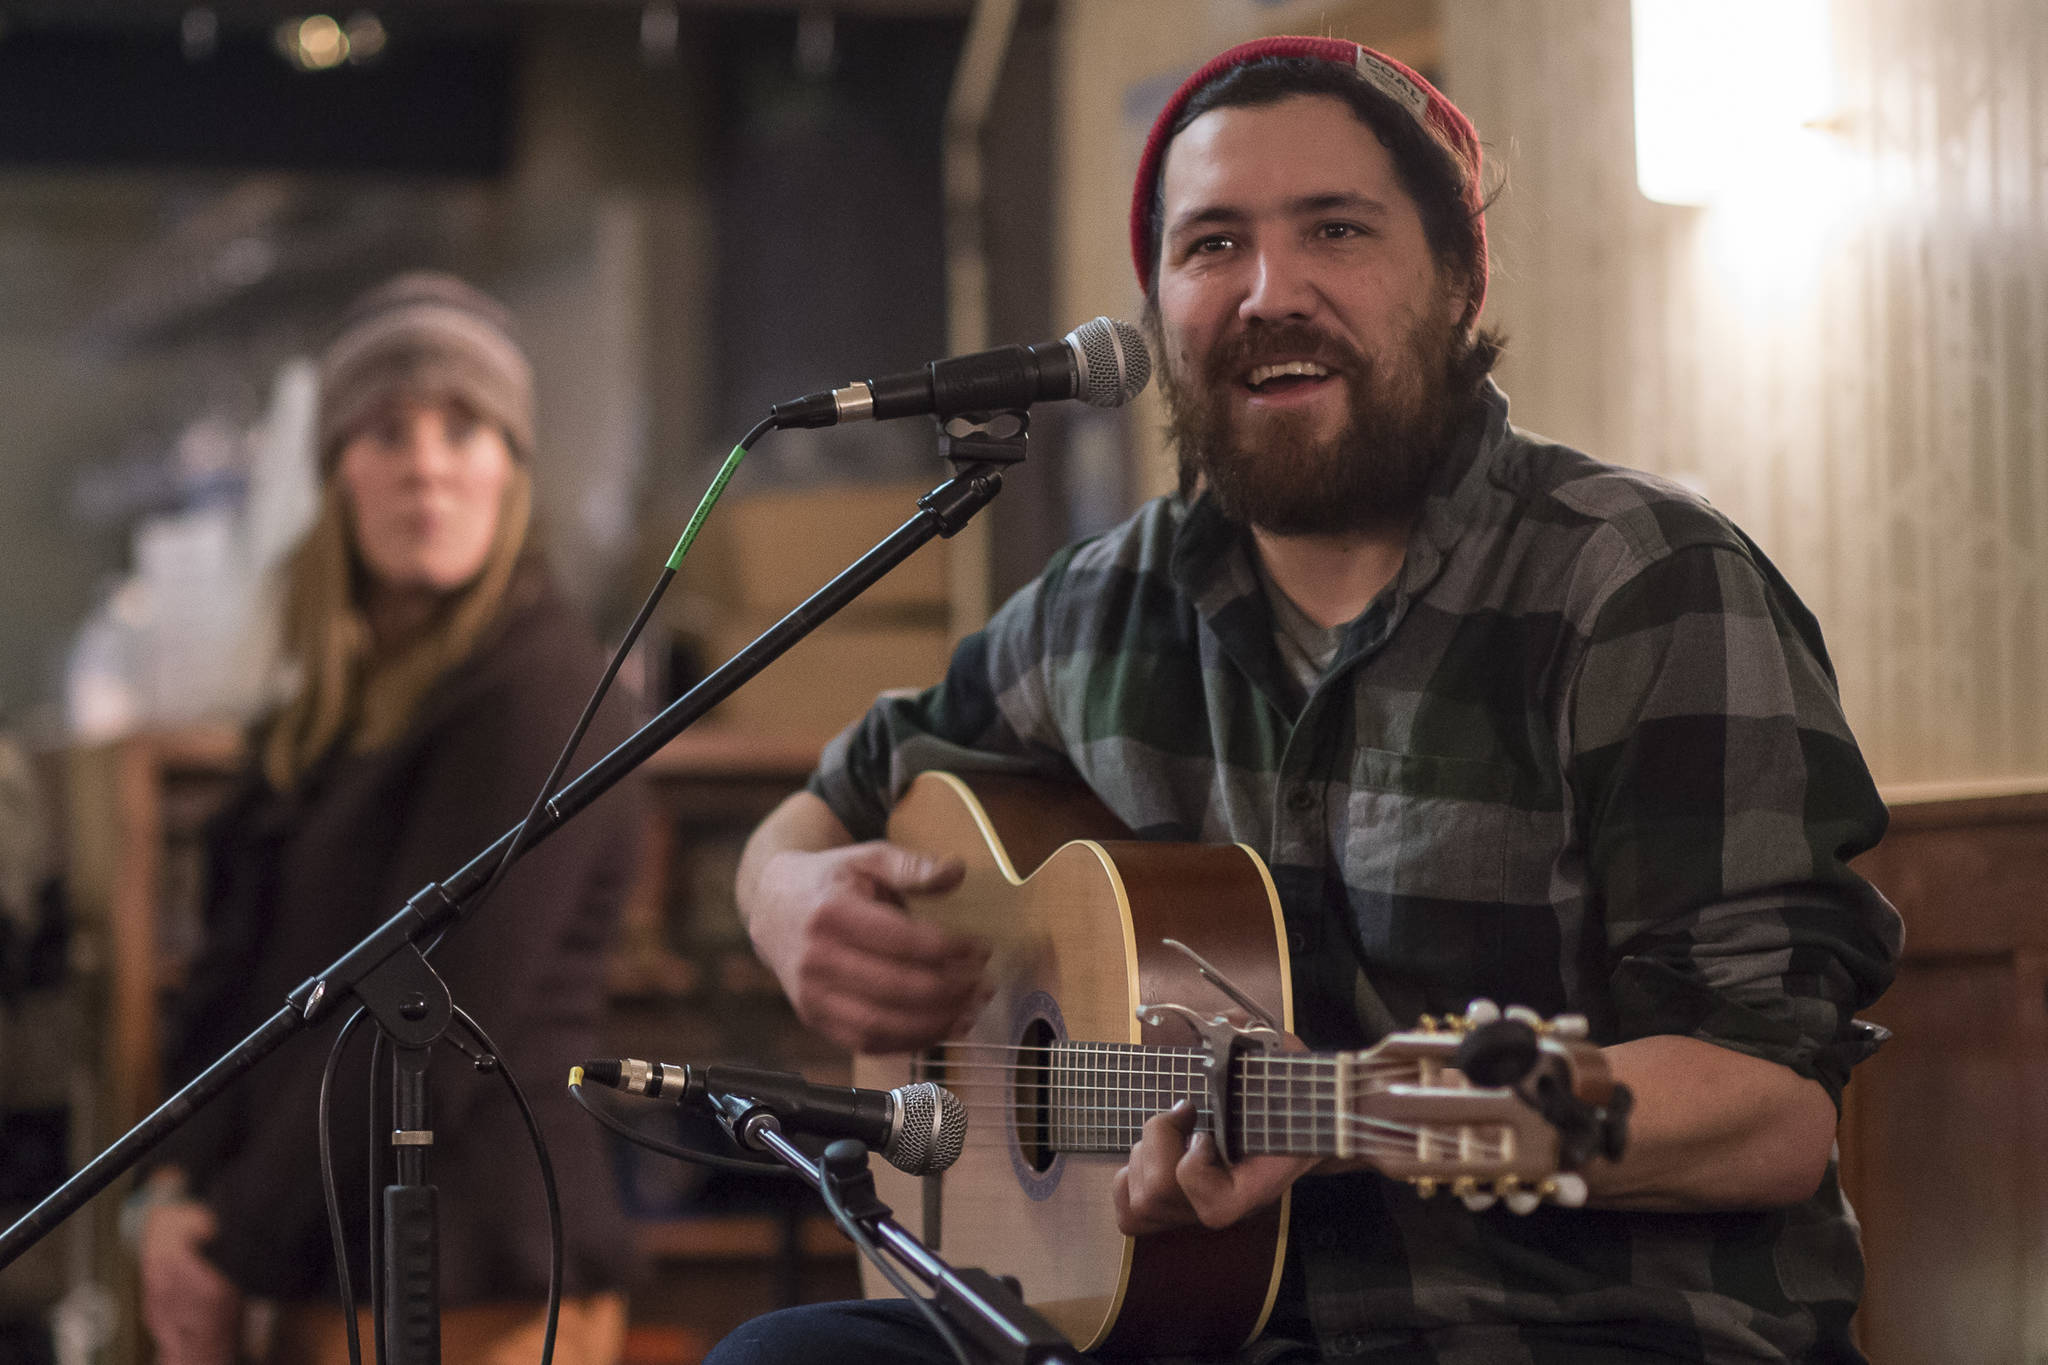 Daniel Firmin plays a two-song set during the Mountainside Open Mic & Art Night at The Rookery on Oct. 31, 2018. (Michael Penn | Capital City Weekly File)